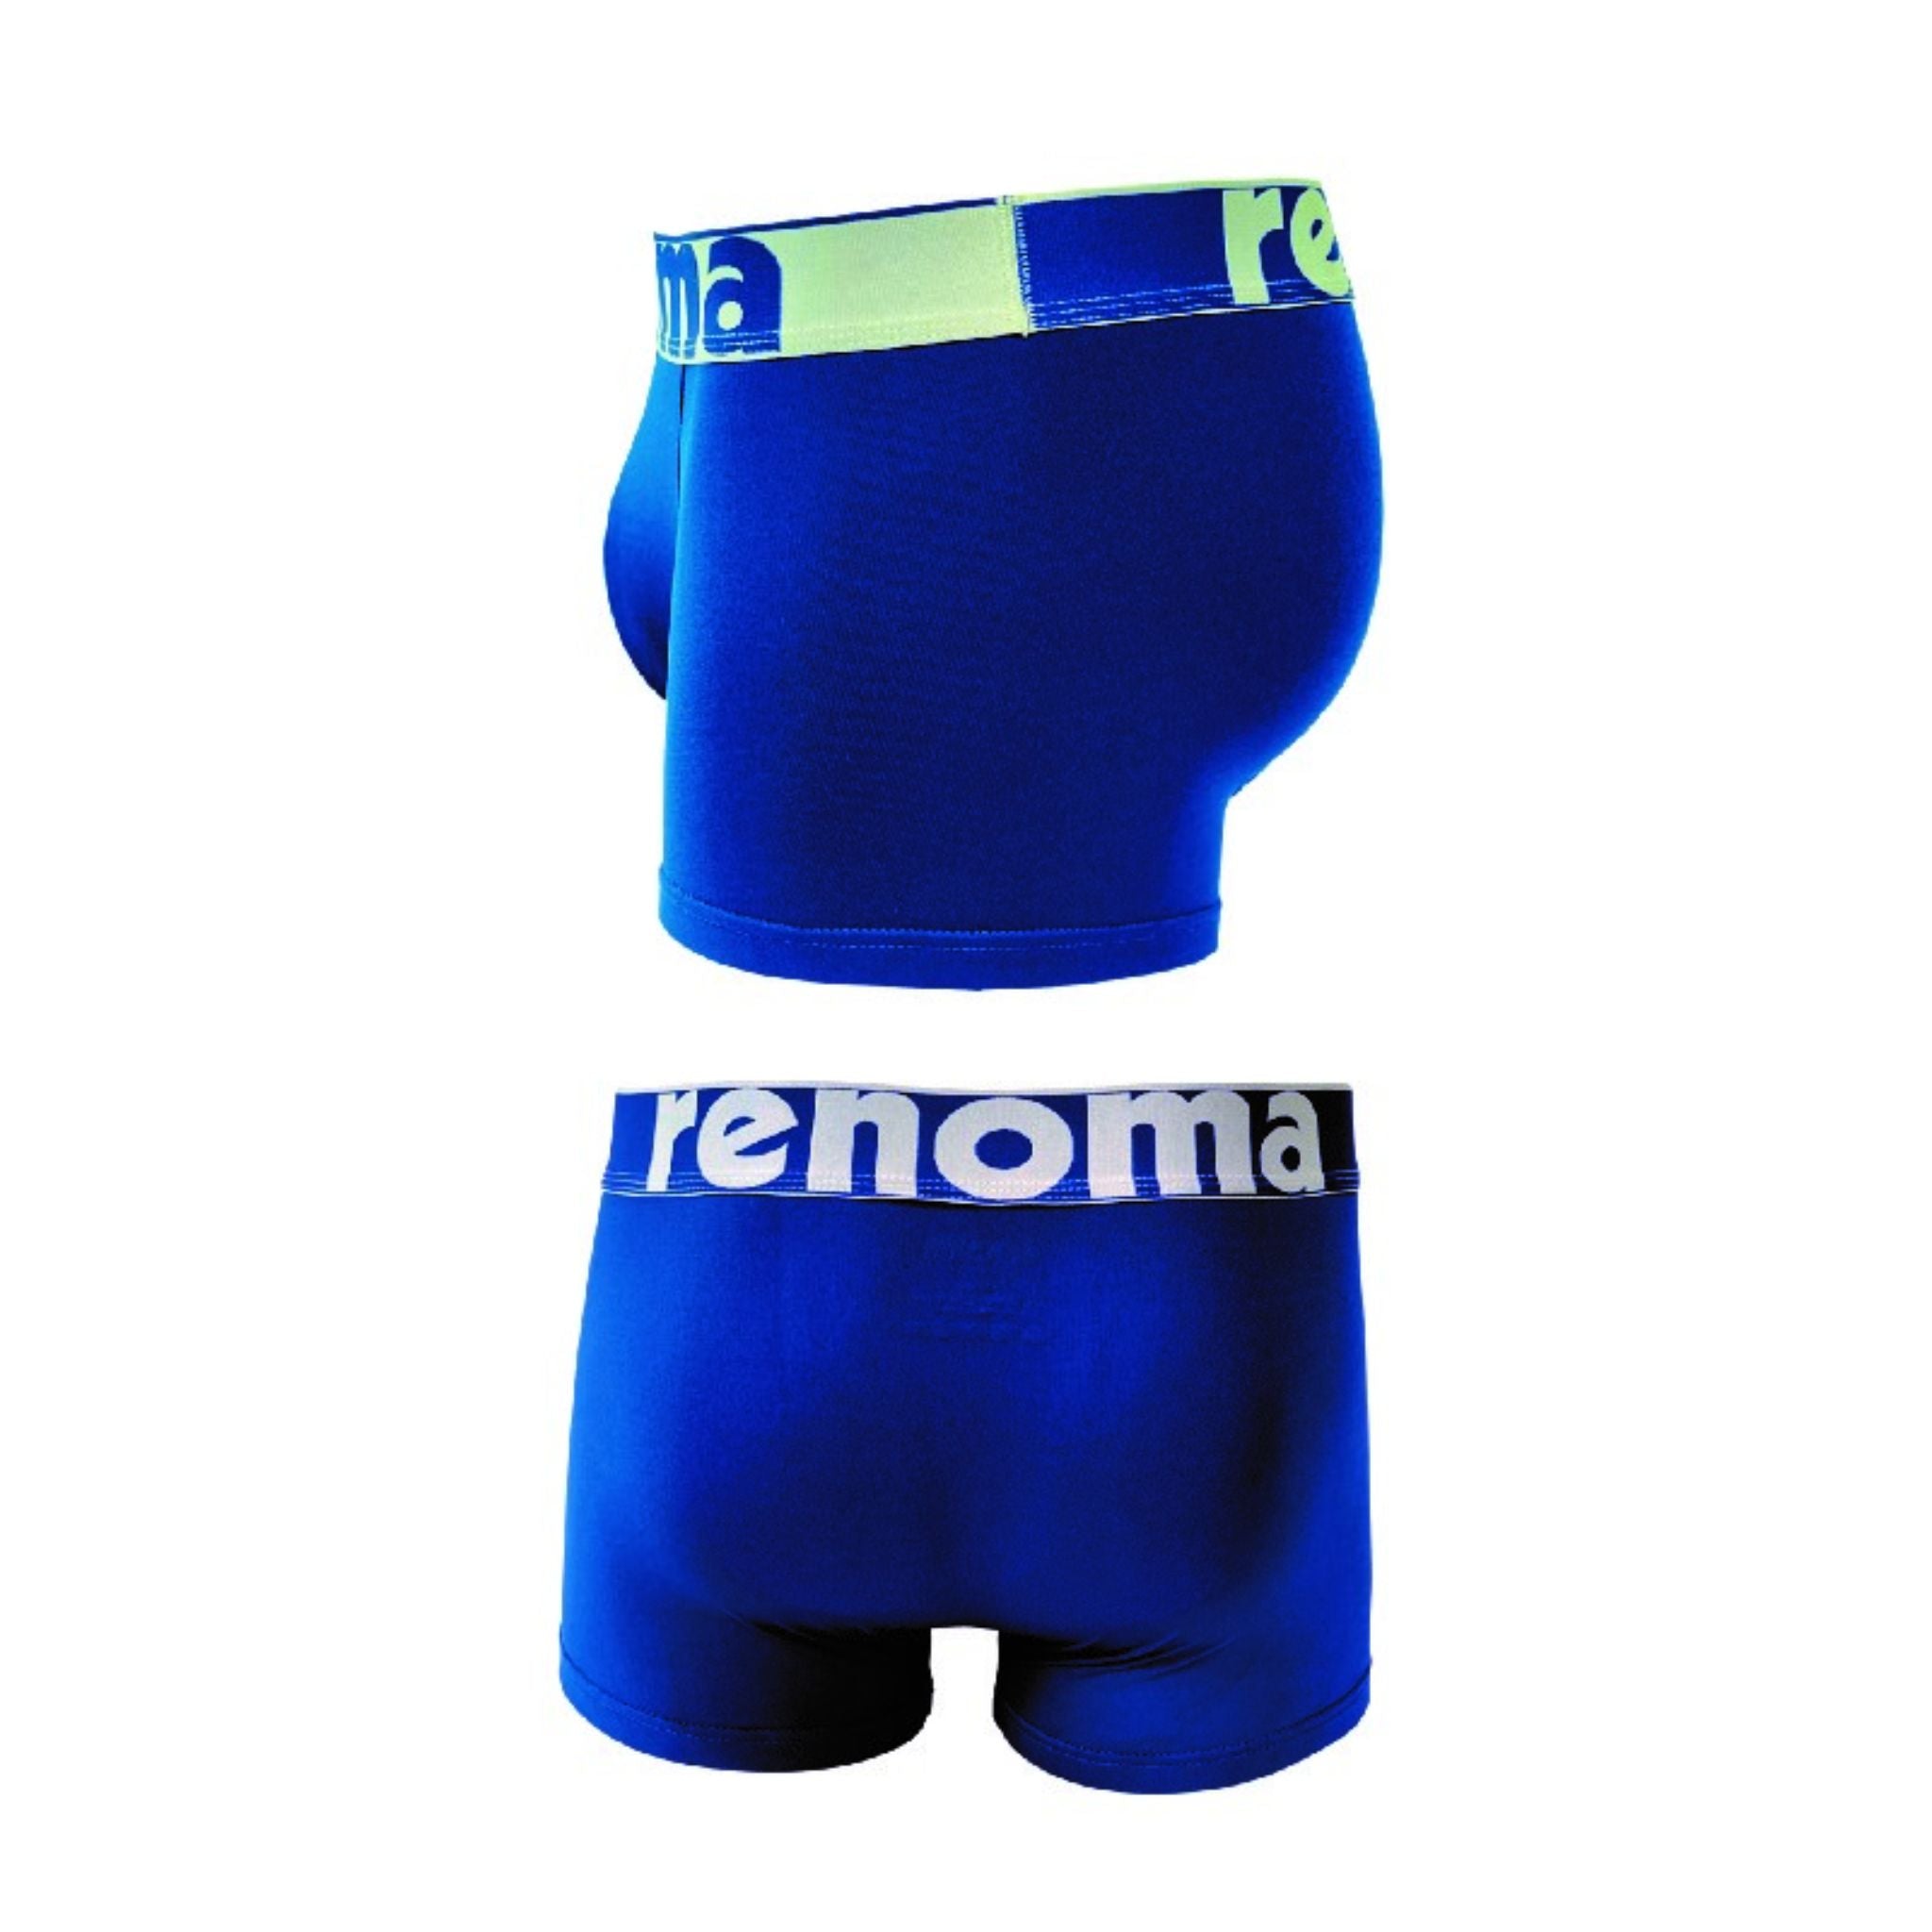 Renoma Sport+ Trunks (1-piece pack) - Assorted Colors